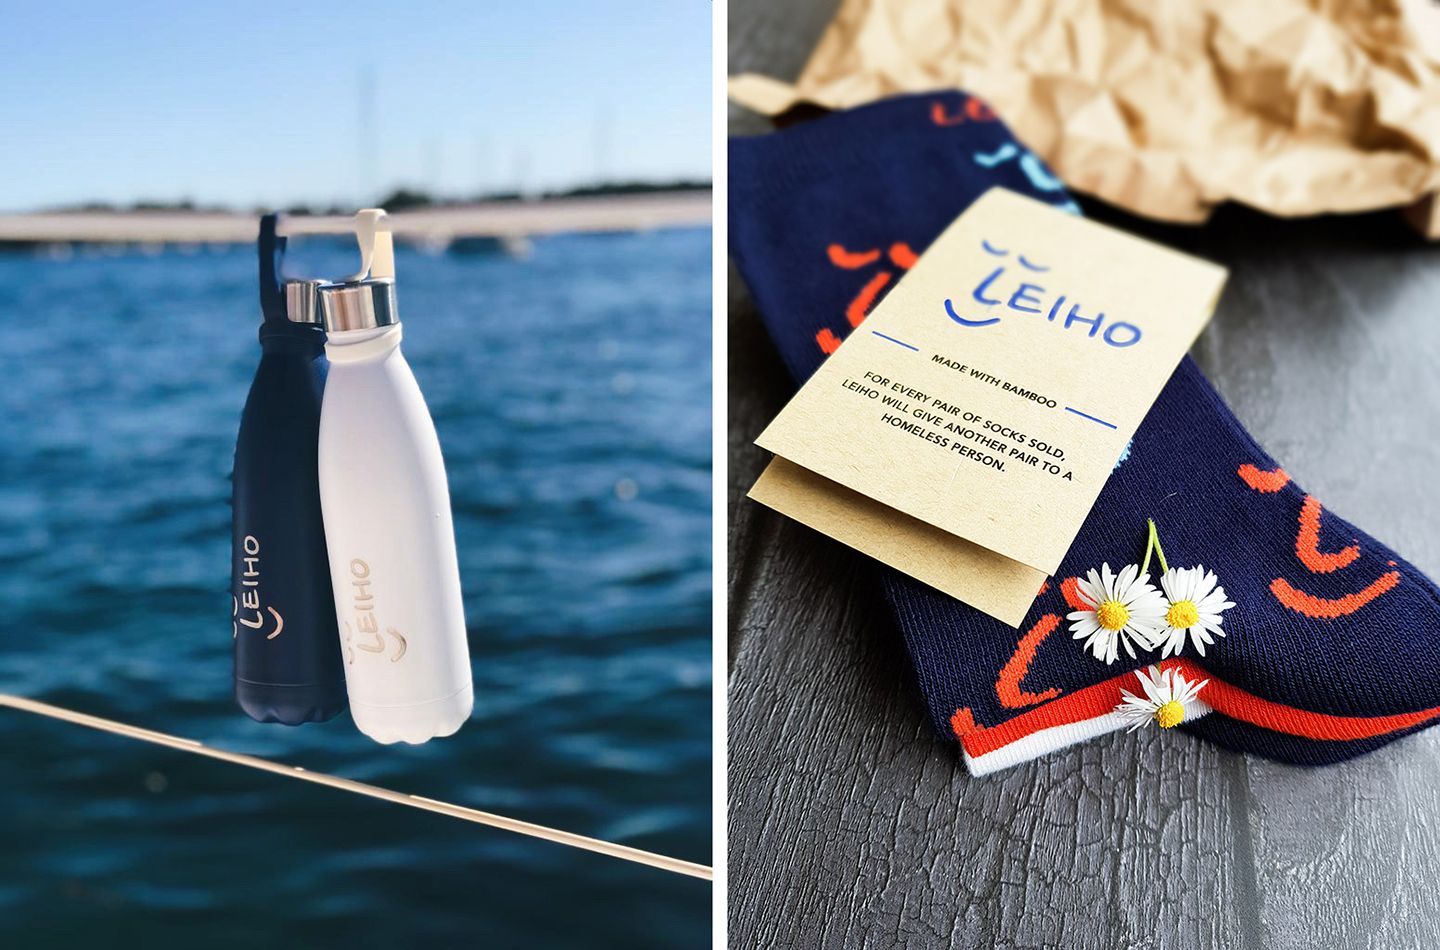 Leiho branded white and blue water bottles and colourful socks